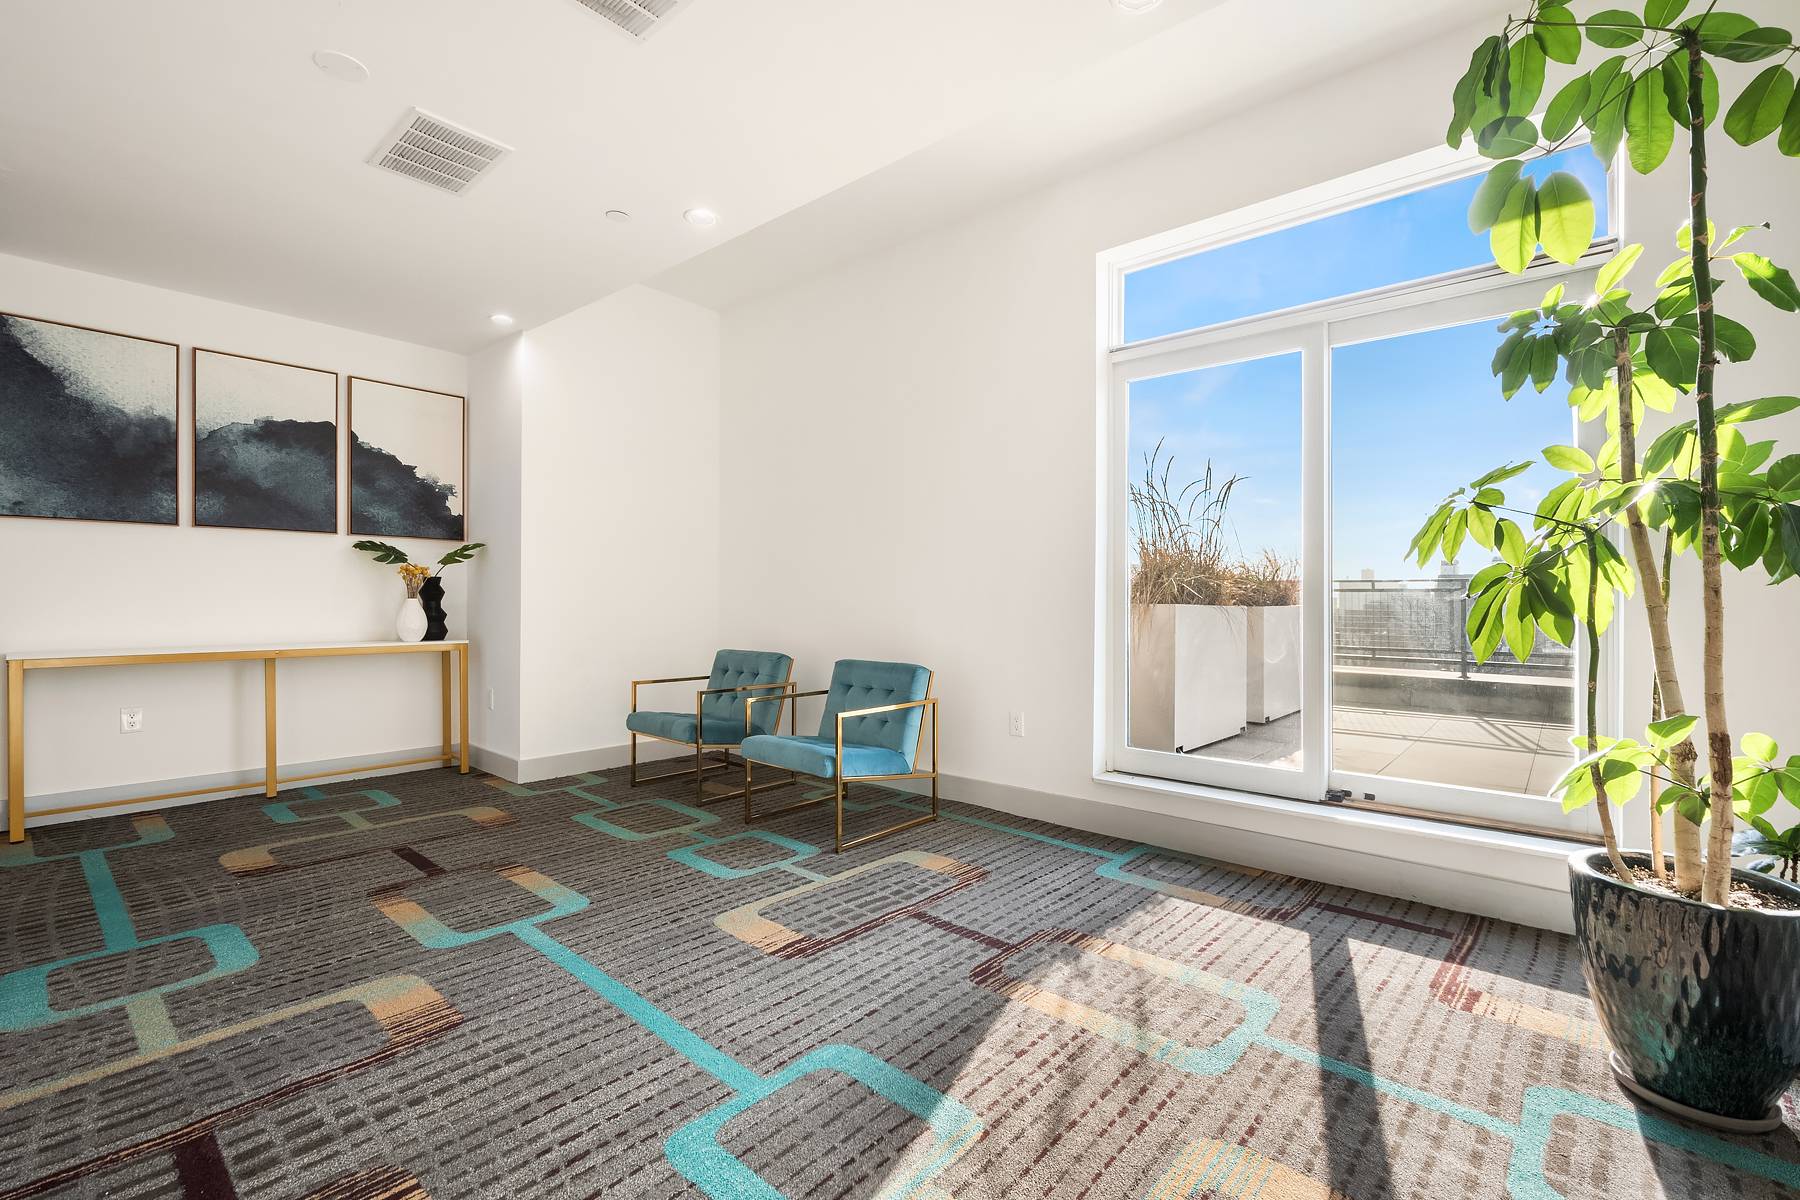 This spacious and bright one bedroom, one bathroom condominium welcomes you home with stunning designer finishes, a balcony and great amenities, including onsite parking.